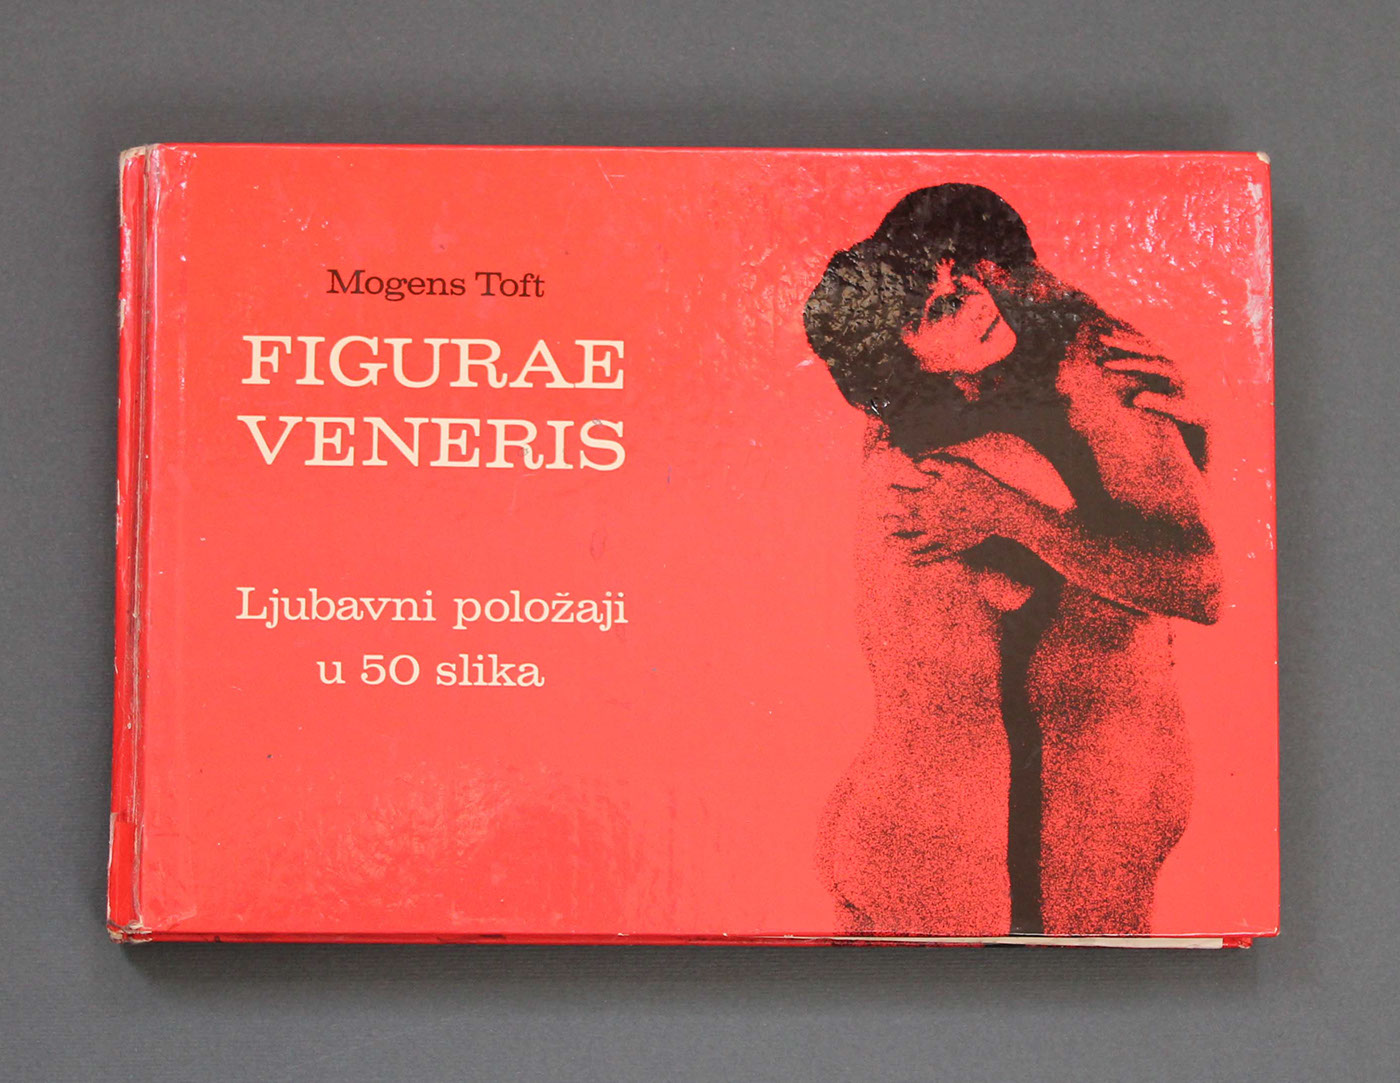 Book of drawings done over the illustrated sex book named "Figurae...